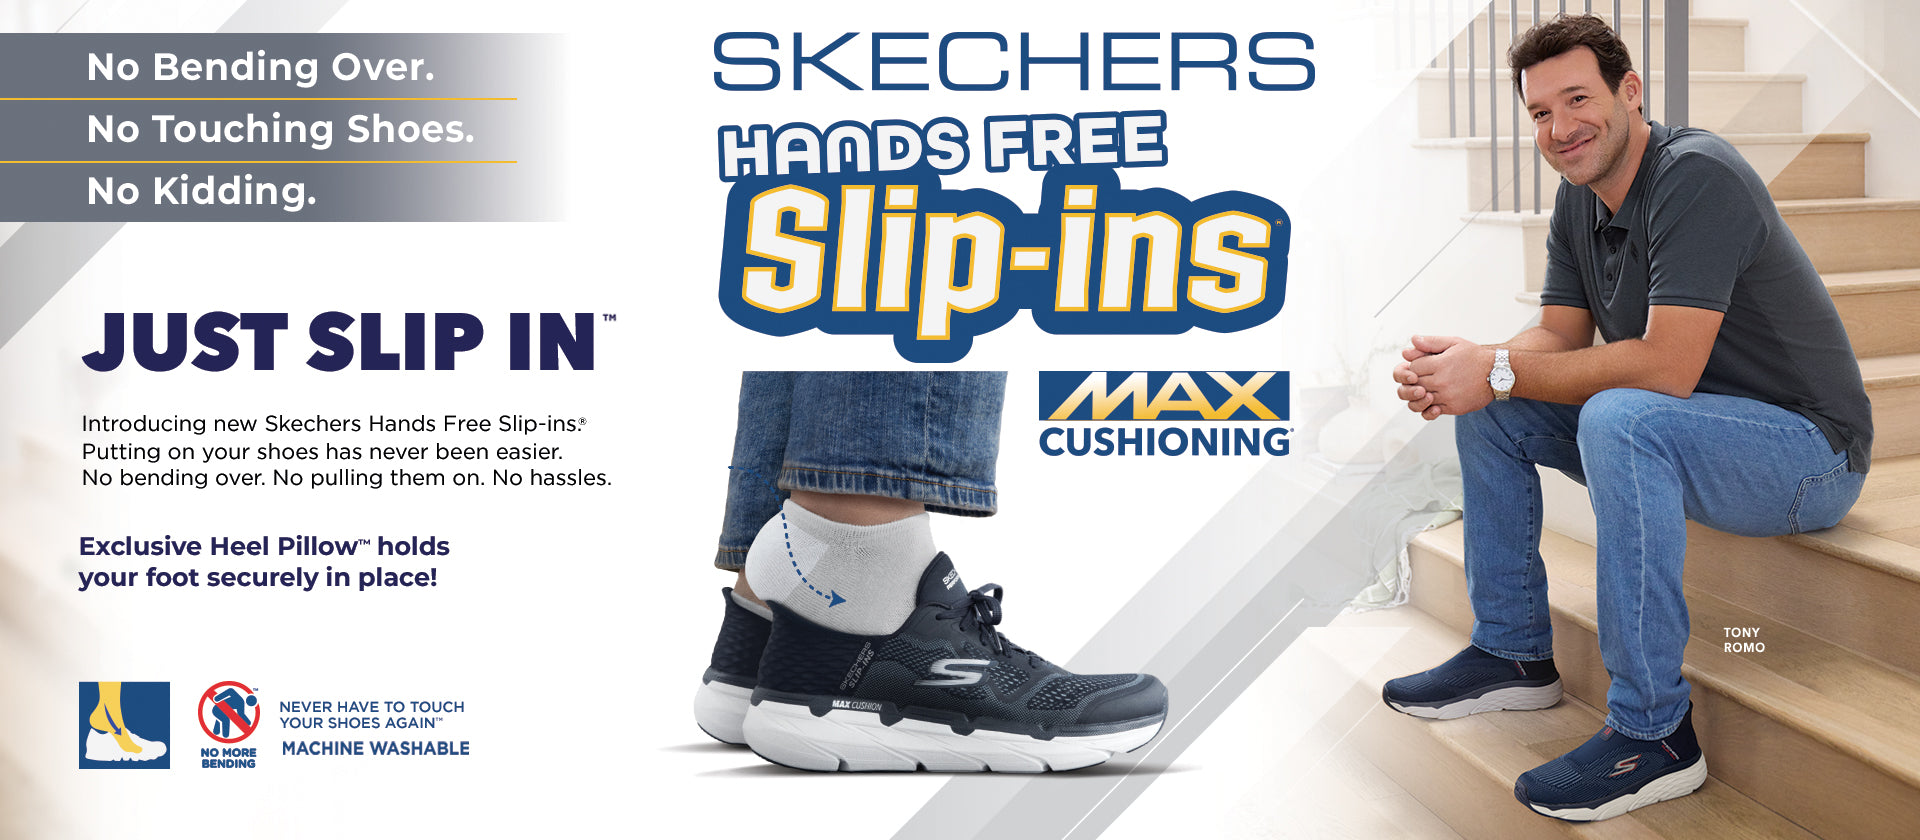 Skechers Singapore Online Store | The Comfort Technology Company